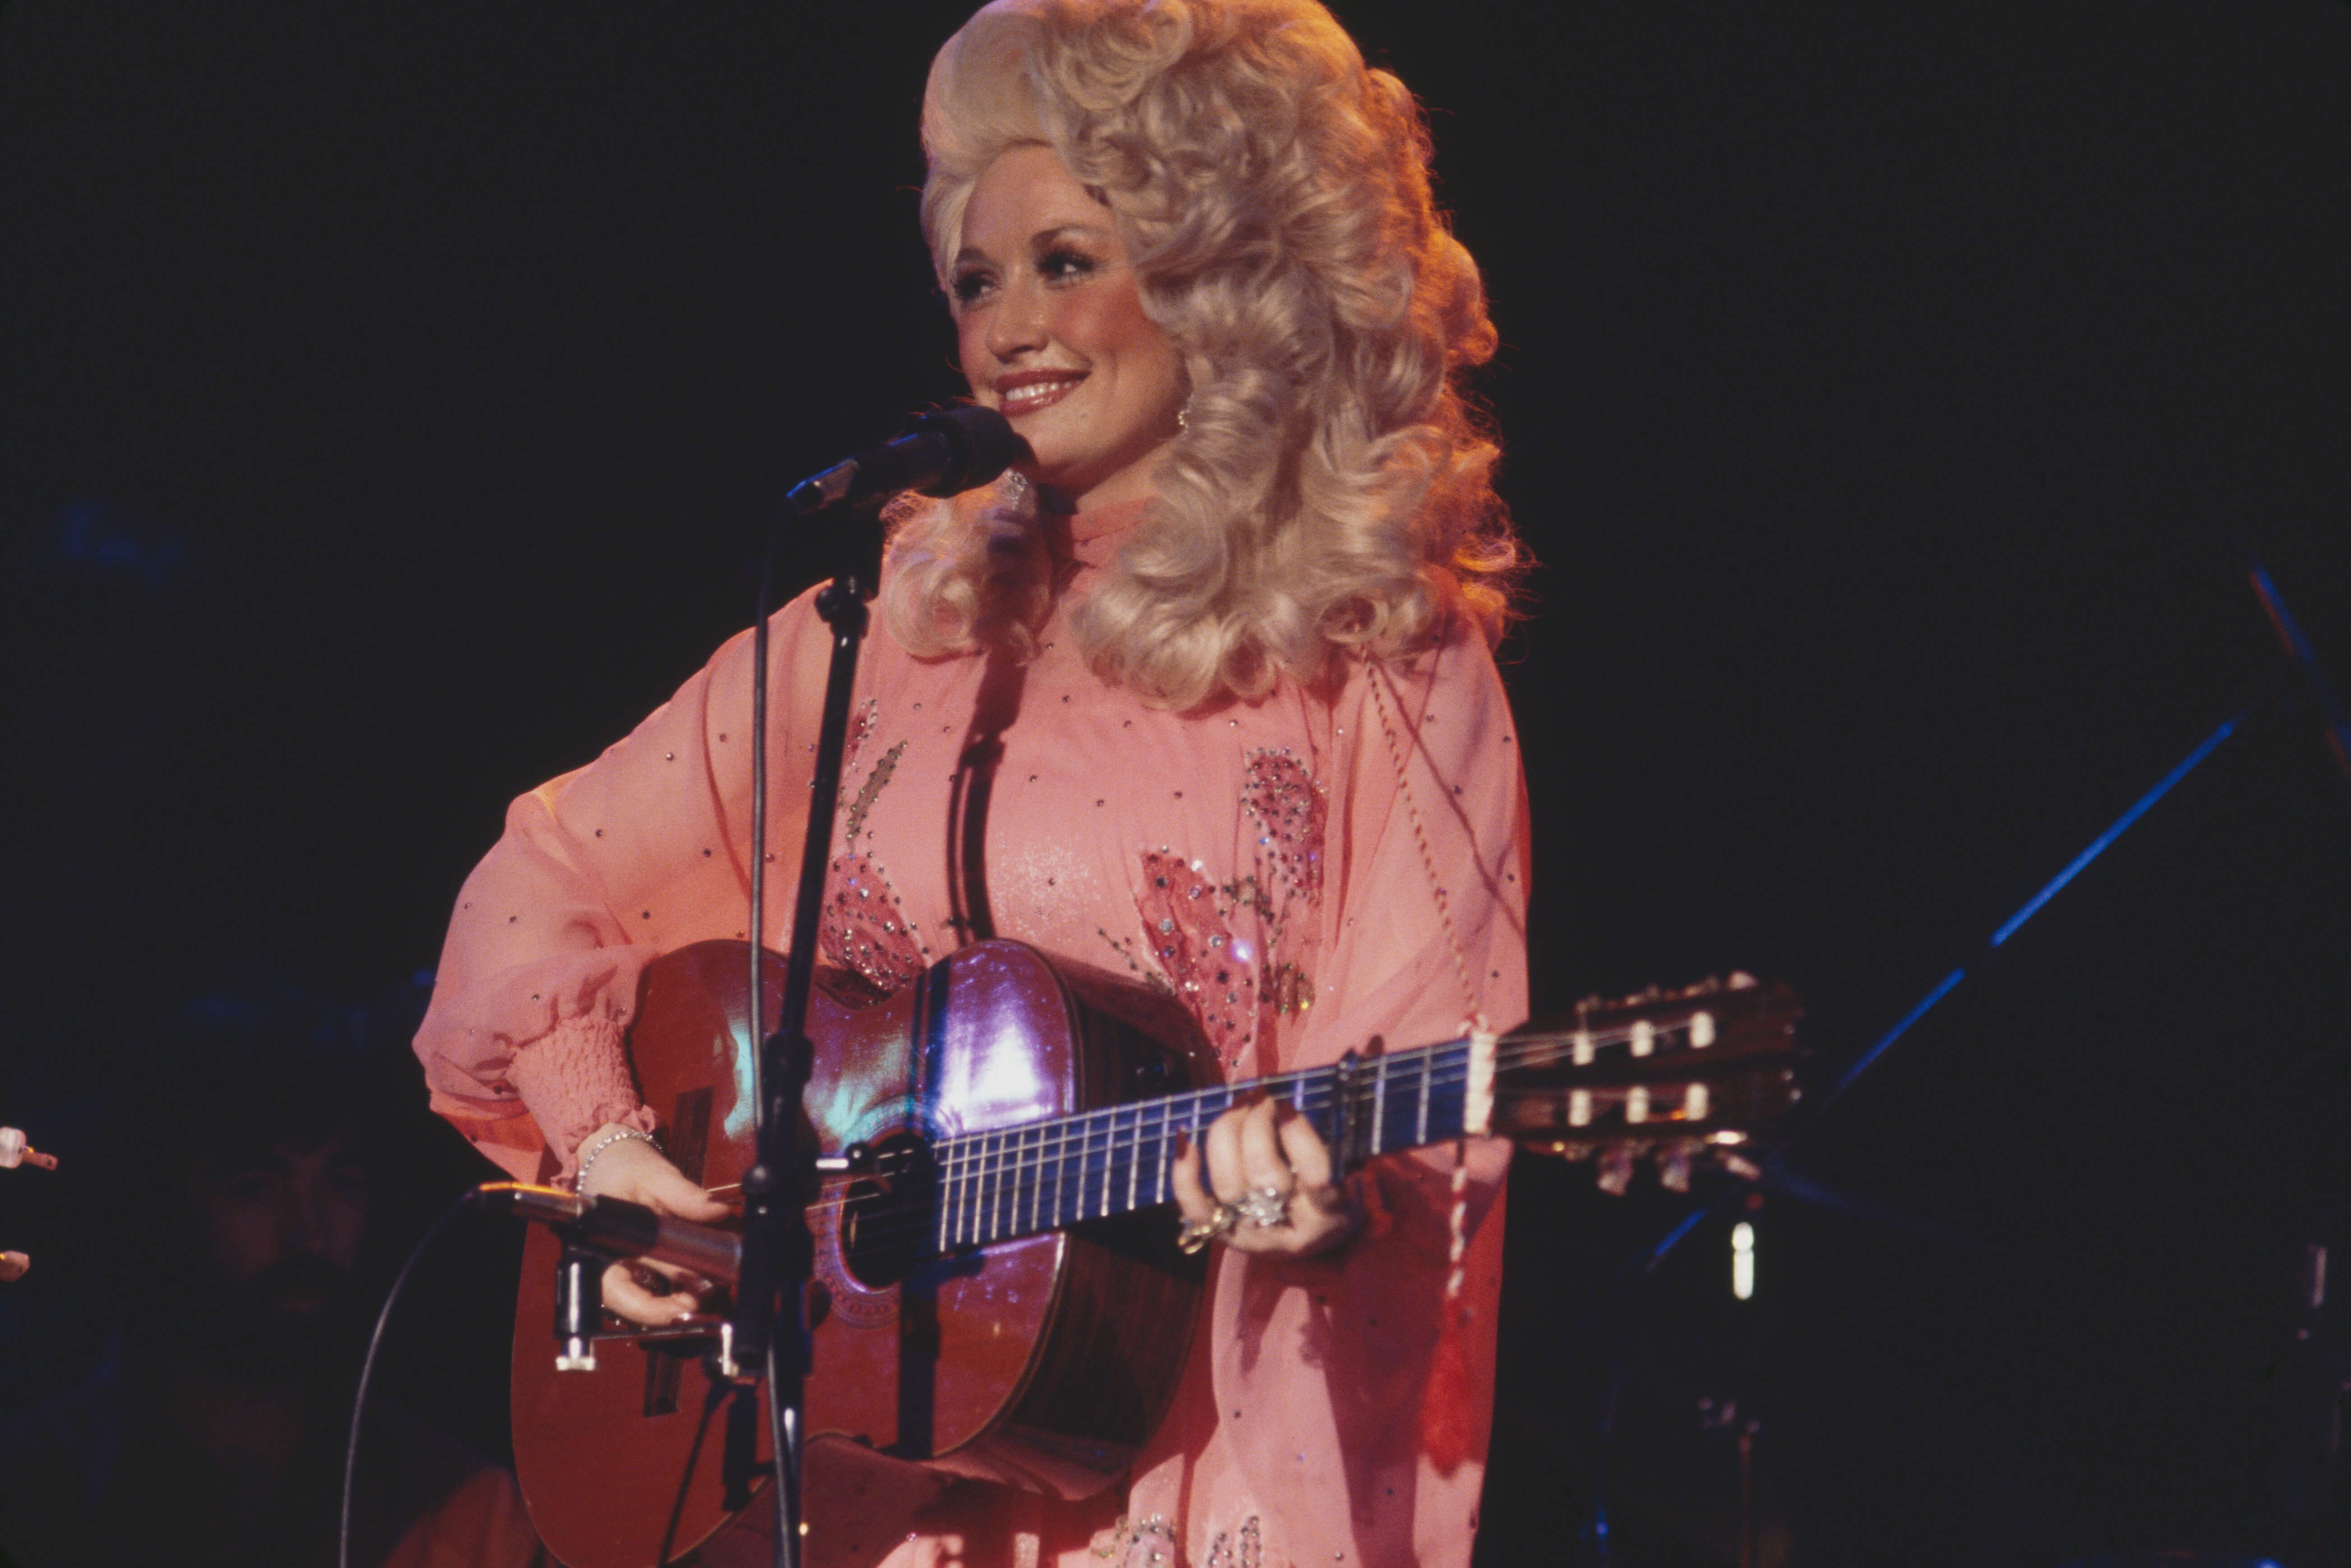 Dolly Parton playing guitar in a pink dress.